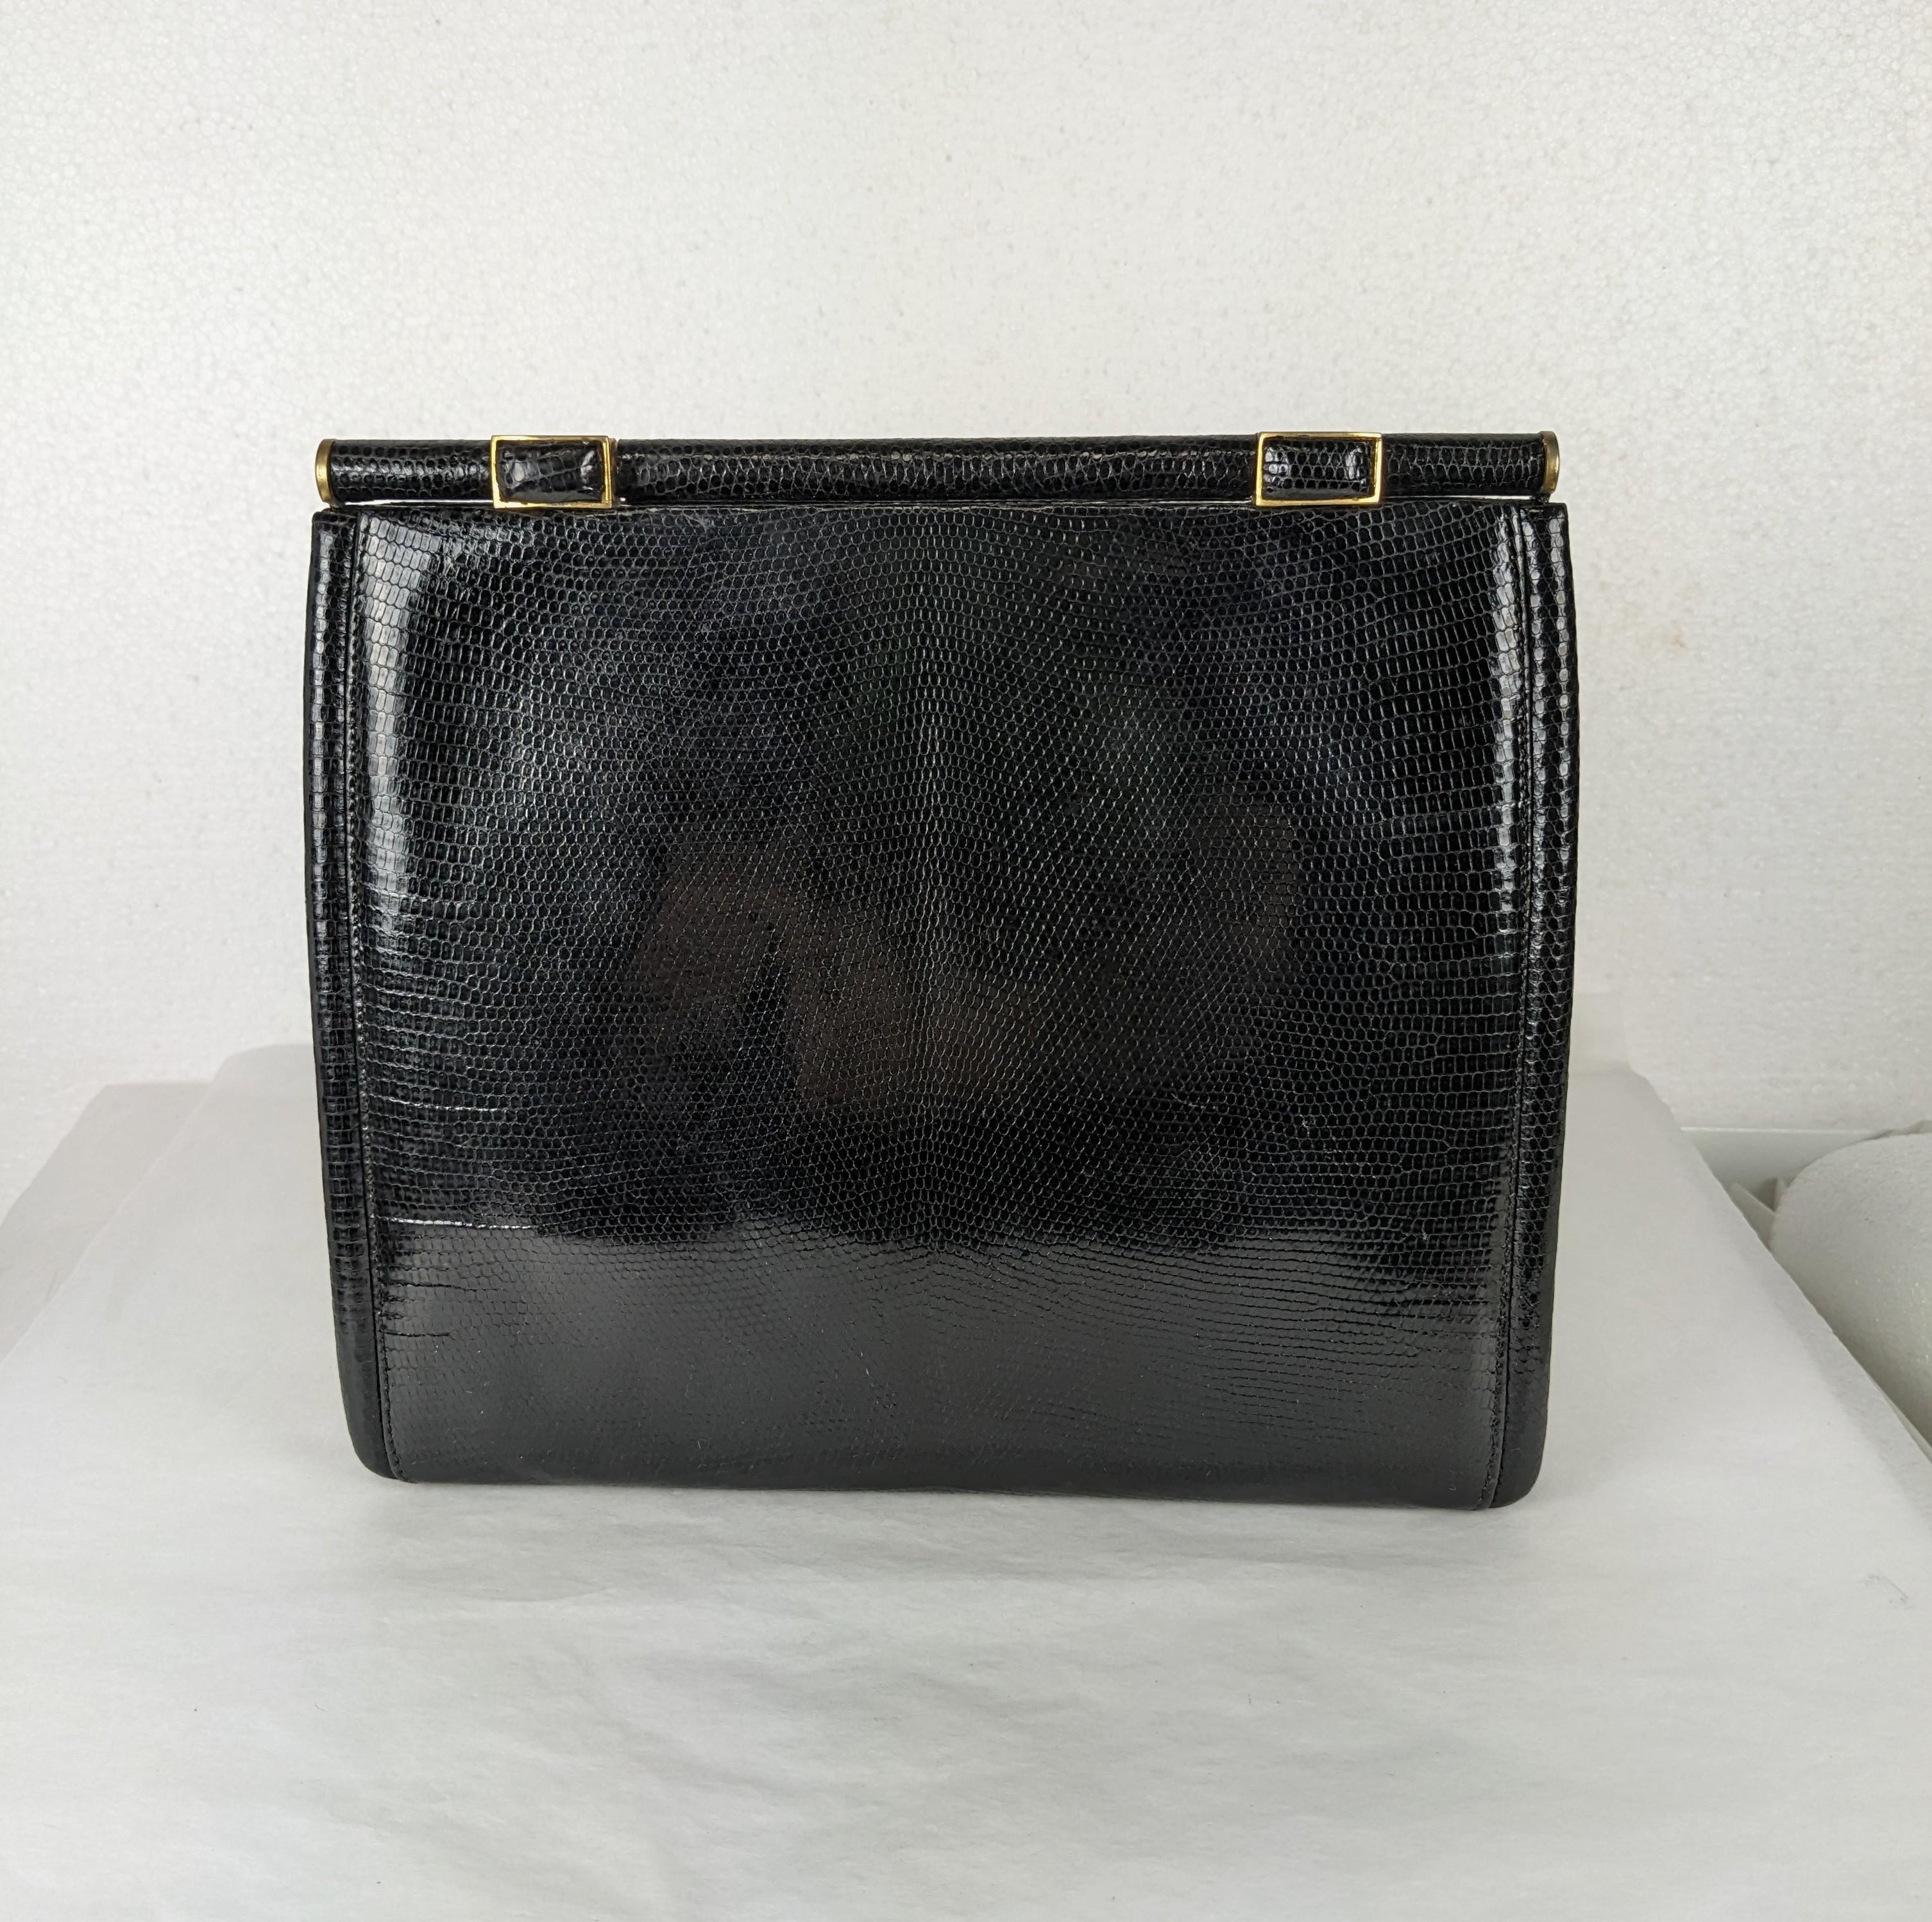 Elegant Gucci Black Lizard Clutch from the 1980's. Elegant square shape with 2 skin covered tabs which you press to unlock frame. Expands at base to hold more. Suede lining. 1980's Italy. 8.5